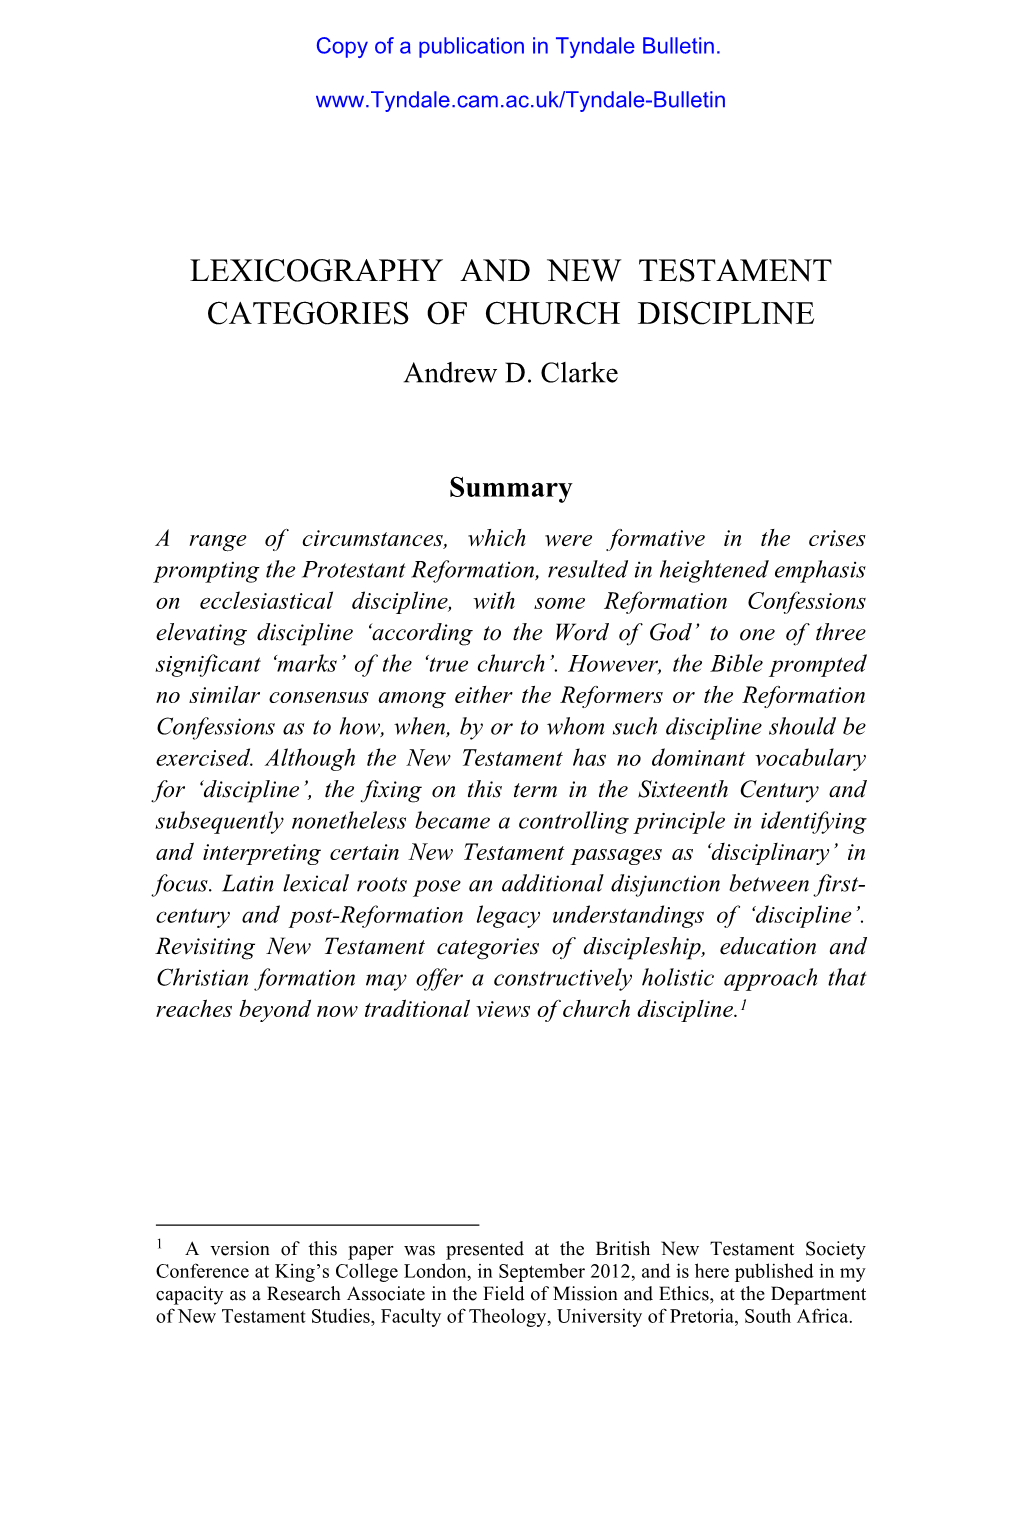 LEXICOGRAPHY and NEW TESTAMENT CATEGORIES of CHURCH DISCIPLINE Andrew D